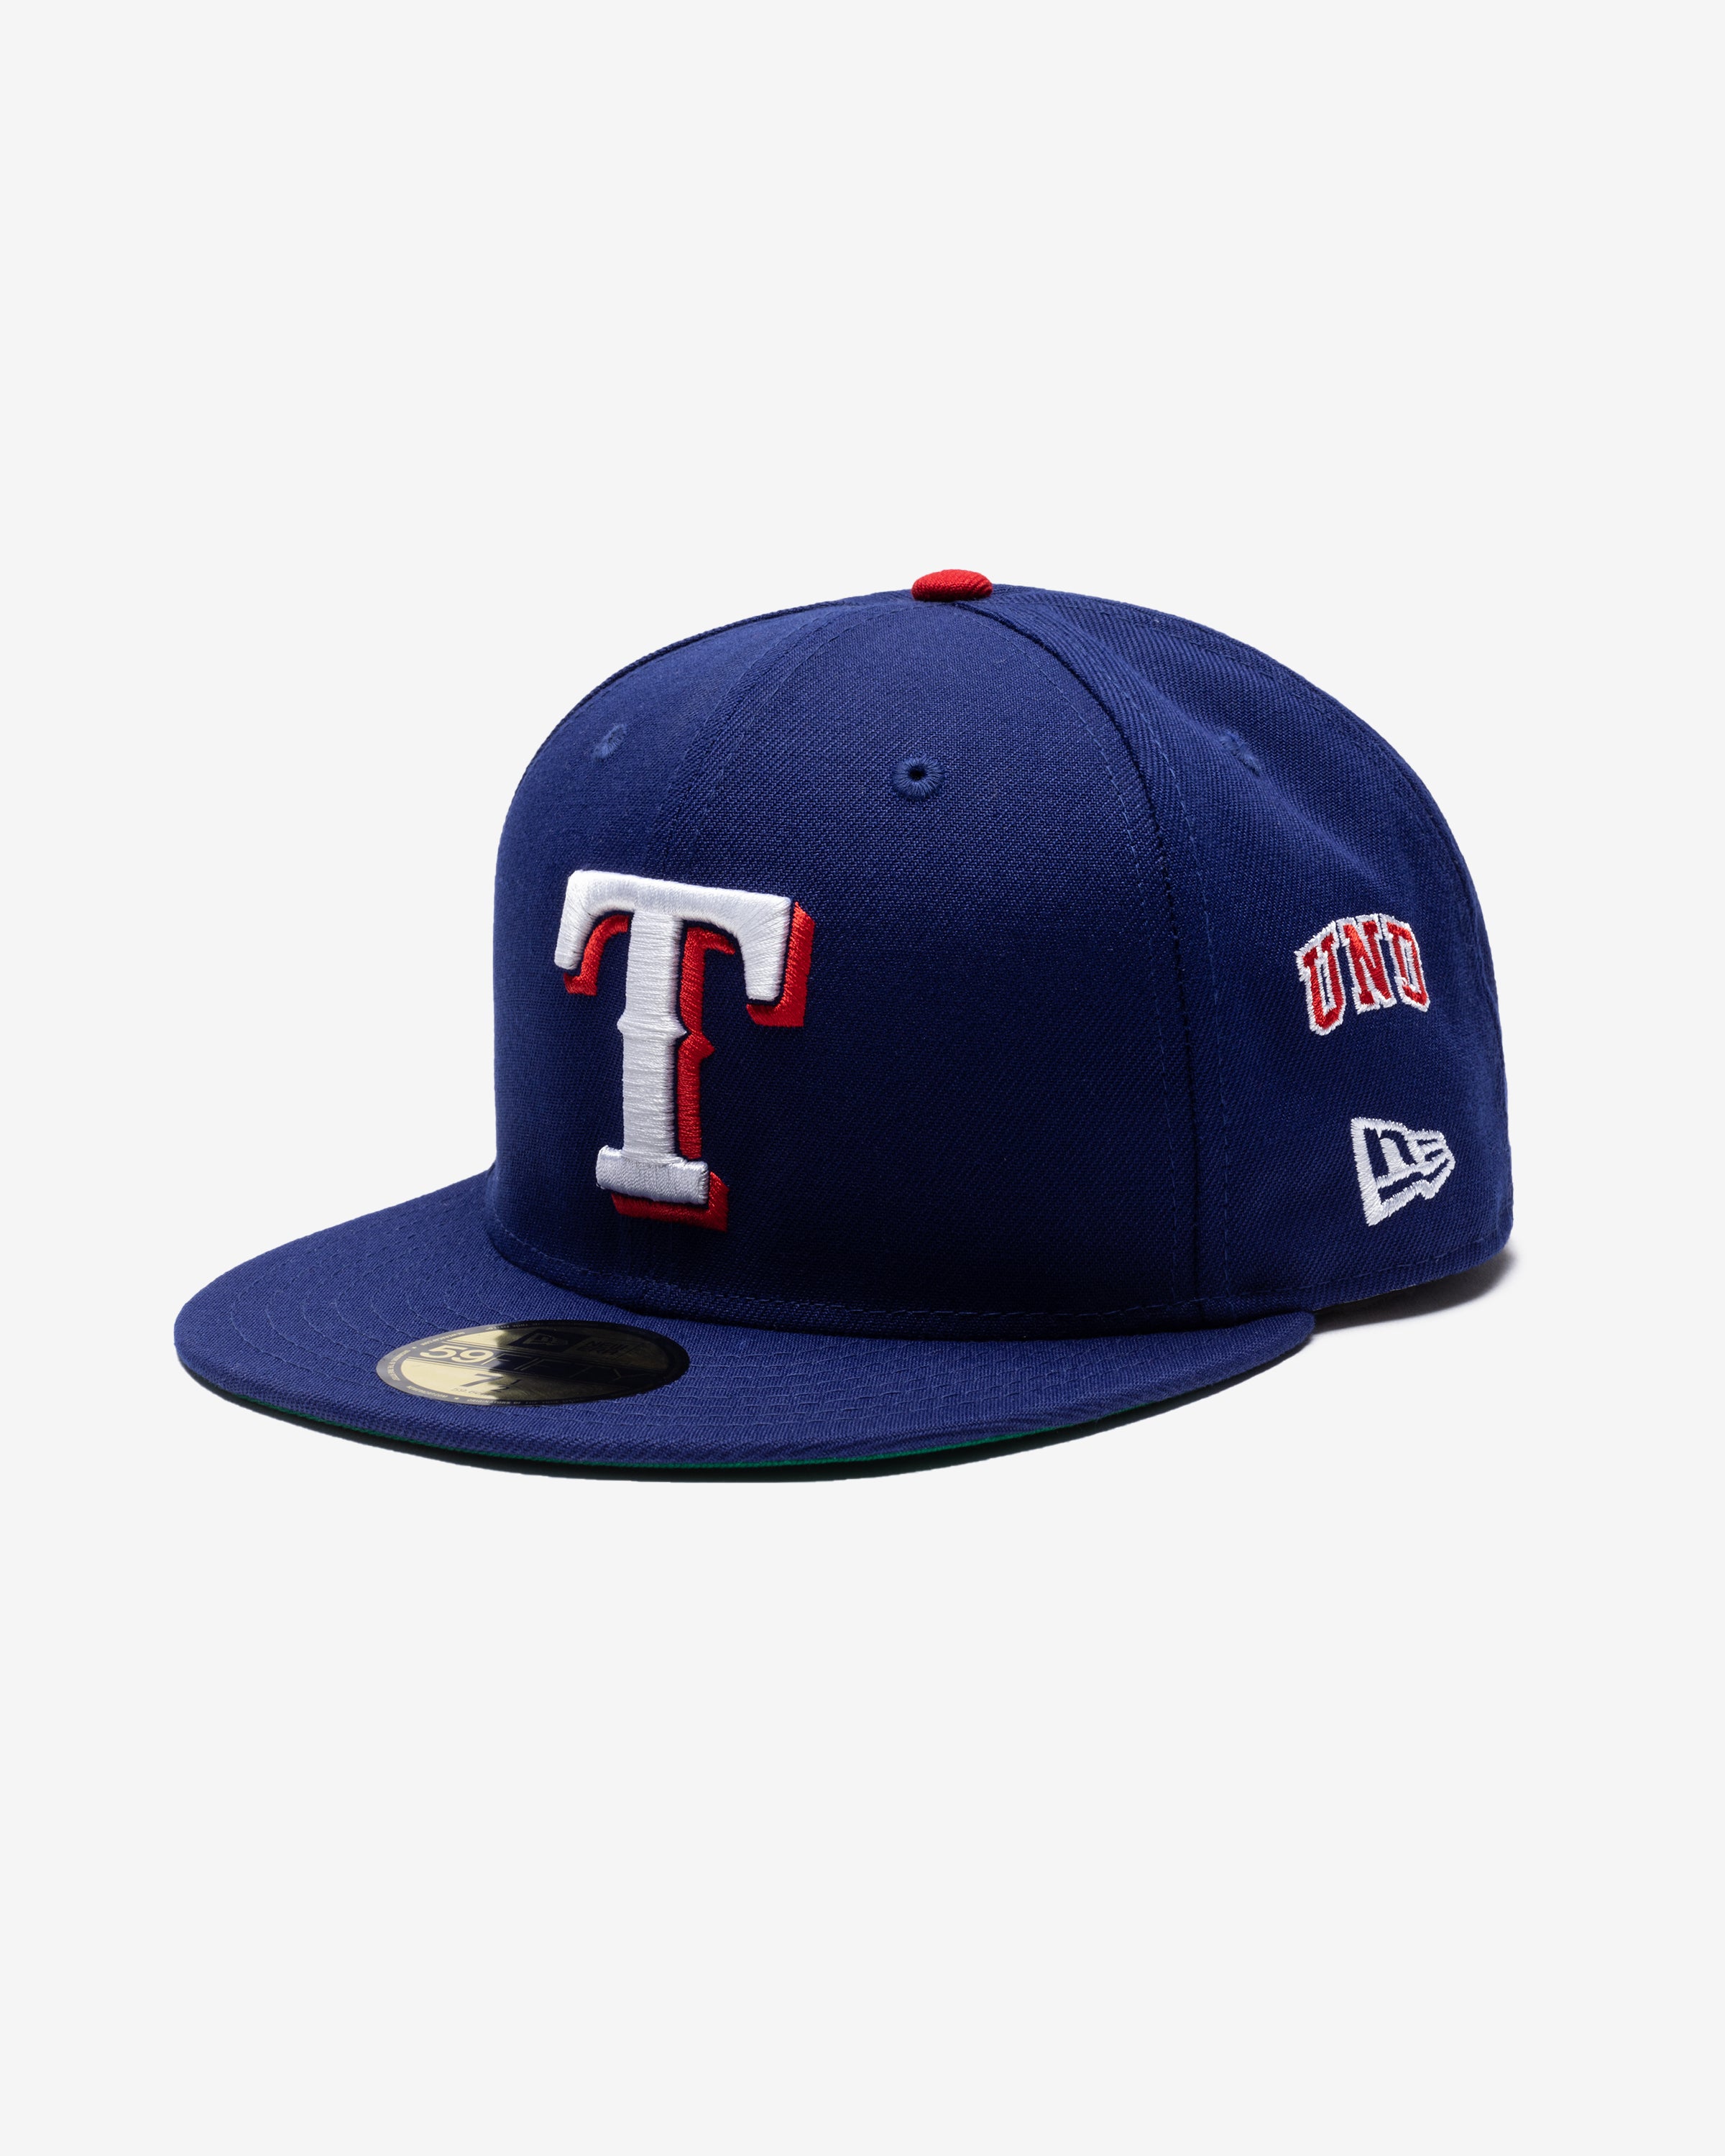 UNDEFEATED X NE X MLB FITTED - TEXAS RANGERS